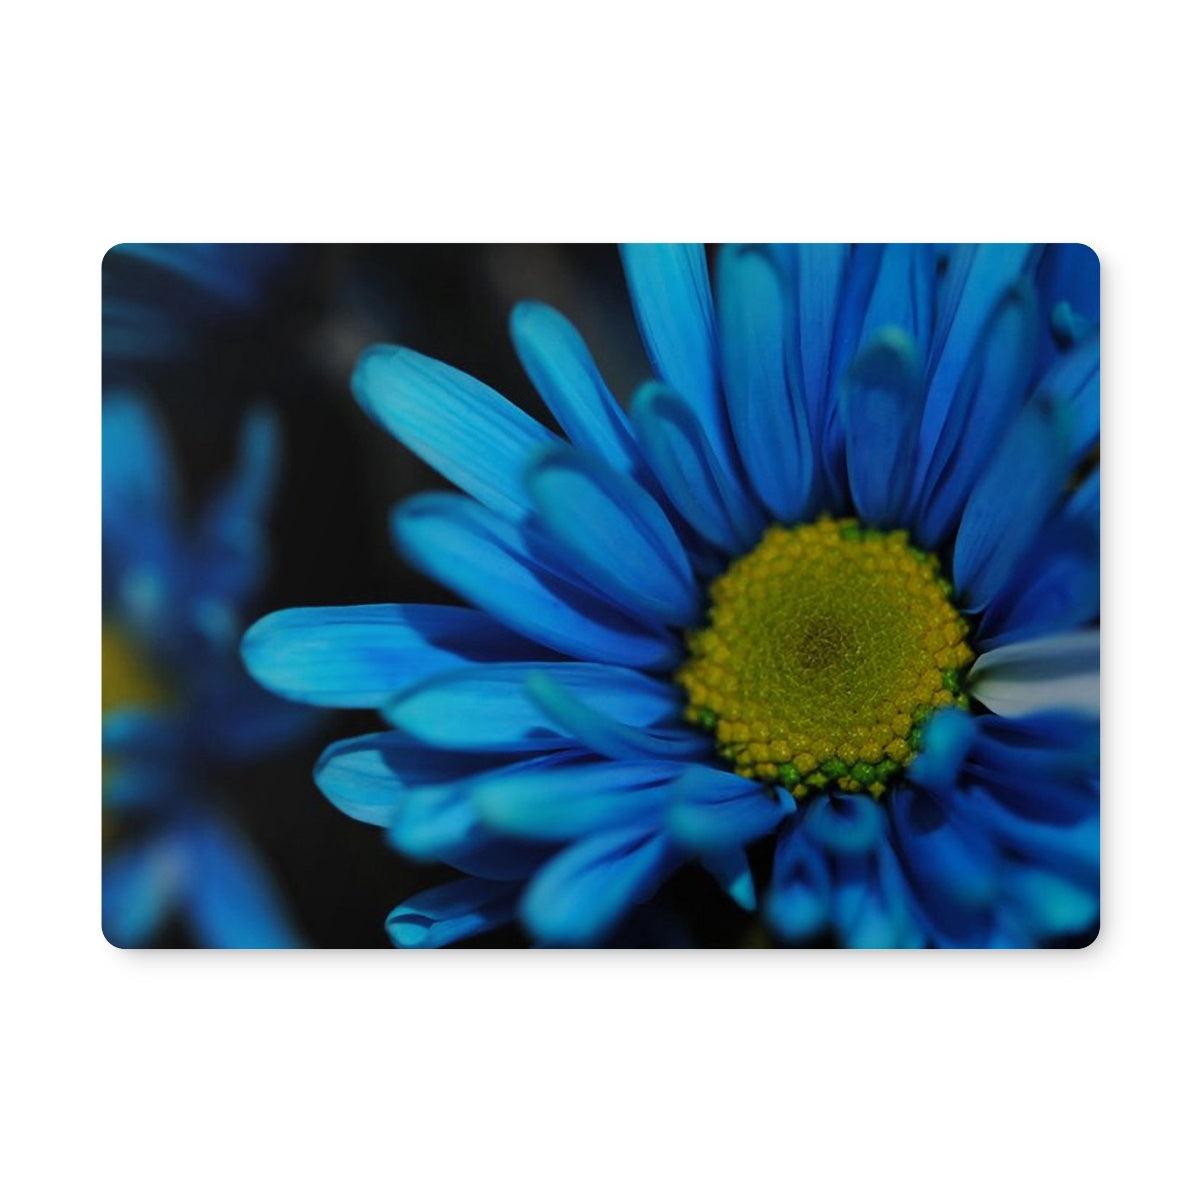 Blue Daisy Placemat